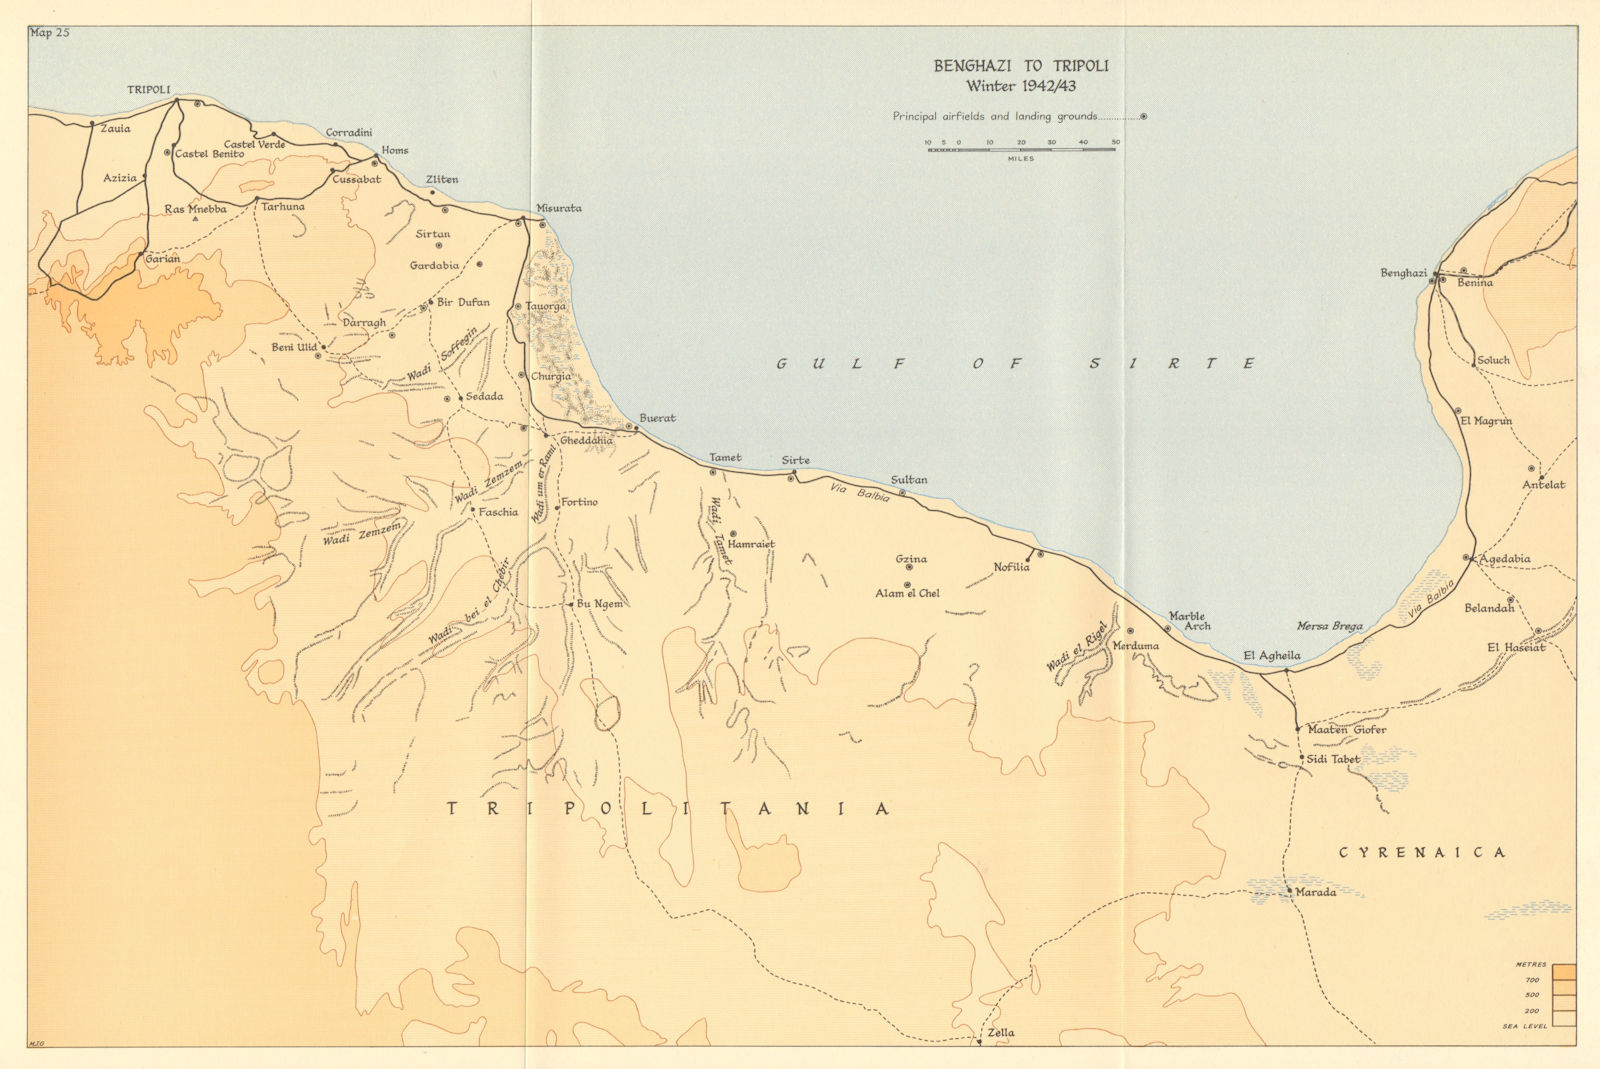 Benghazi to Tripoli Winter 1942/43. World War 2 North Africa Campaign 1966 map